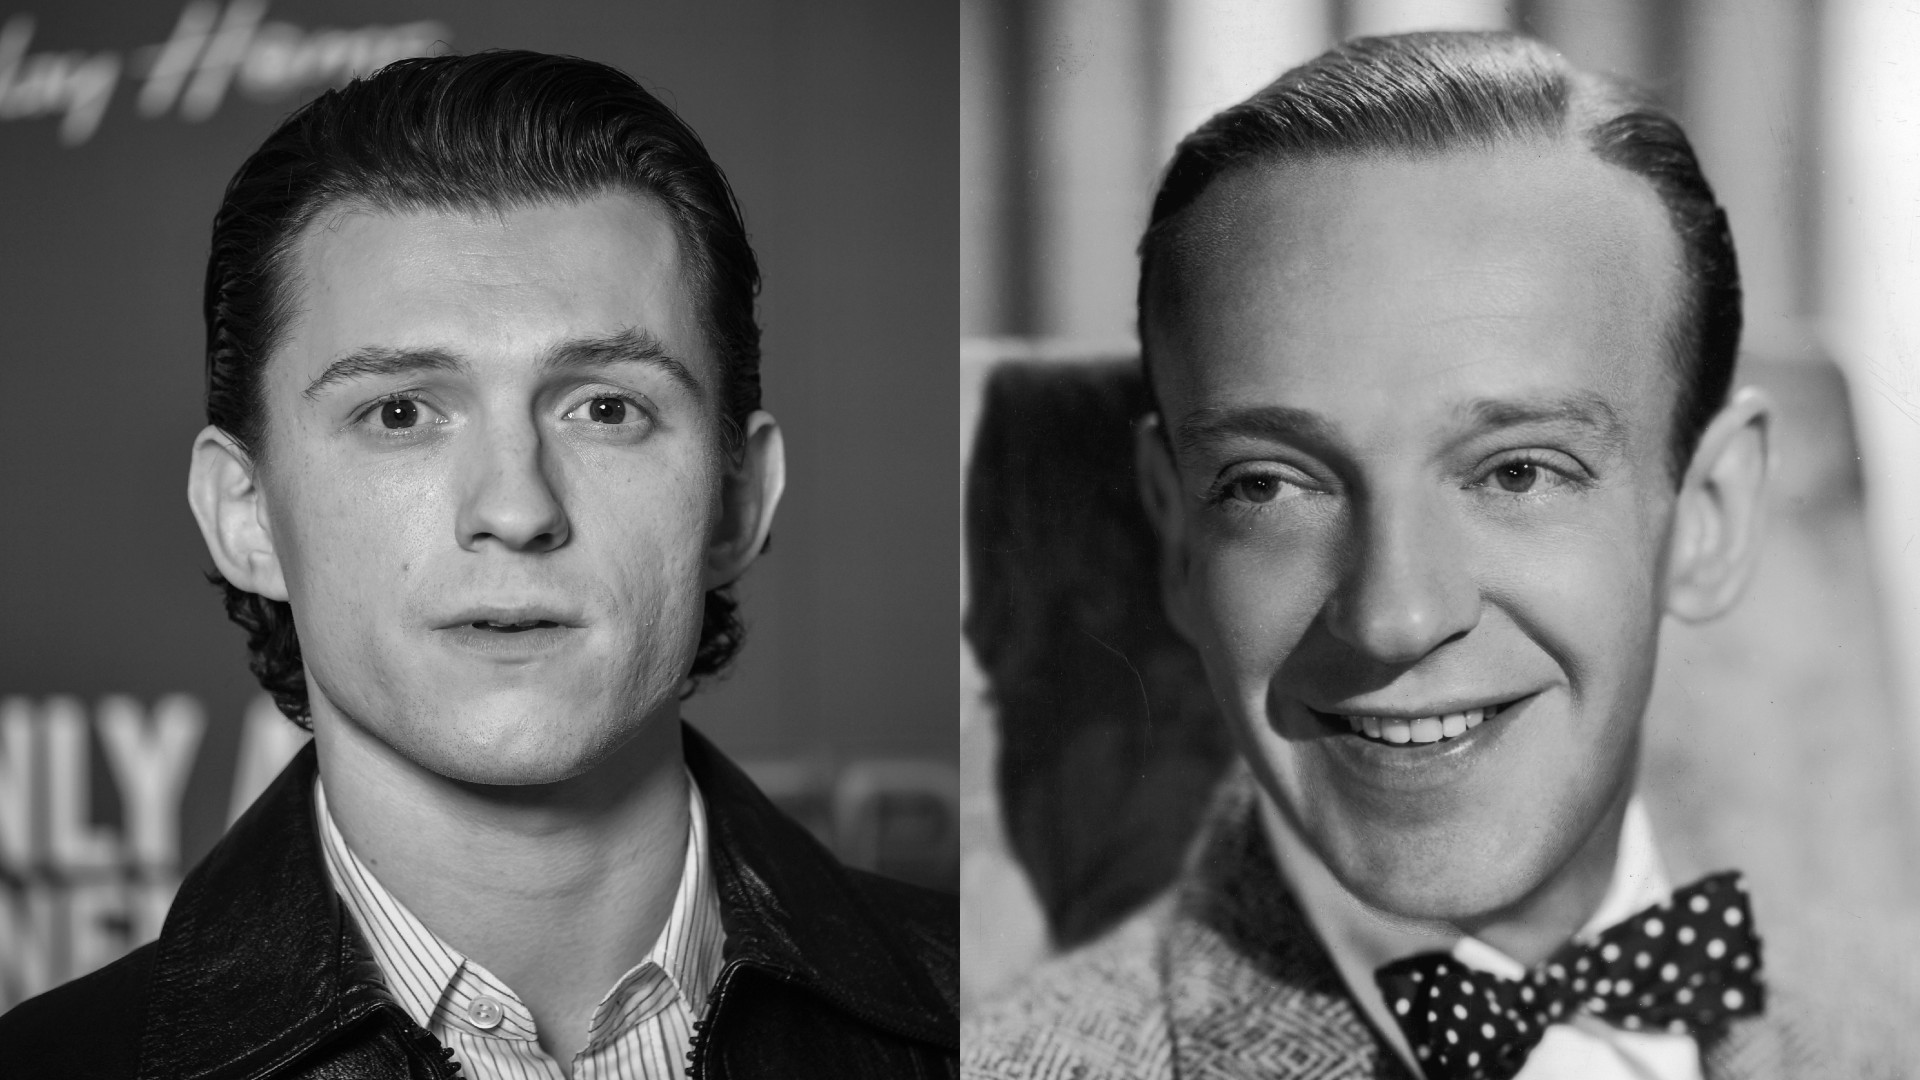 Casting News: Tom Holland Confirms He’s Playing Fred Astaire in a Big Screen Biopic